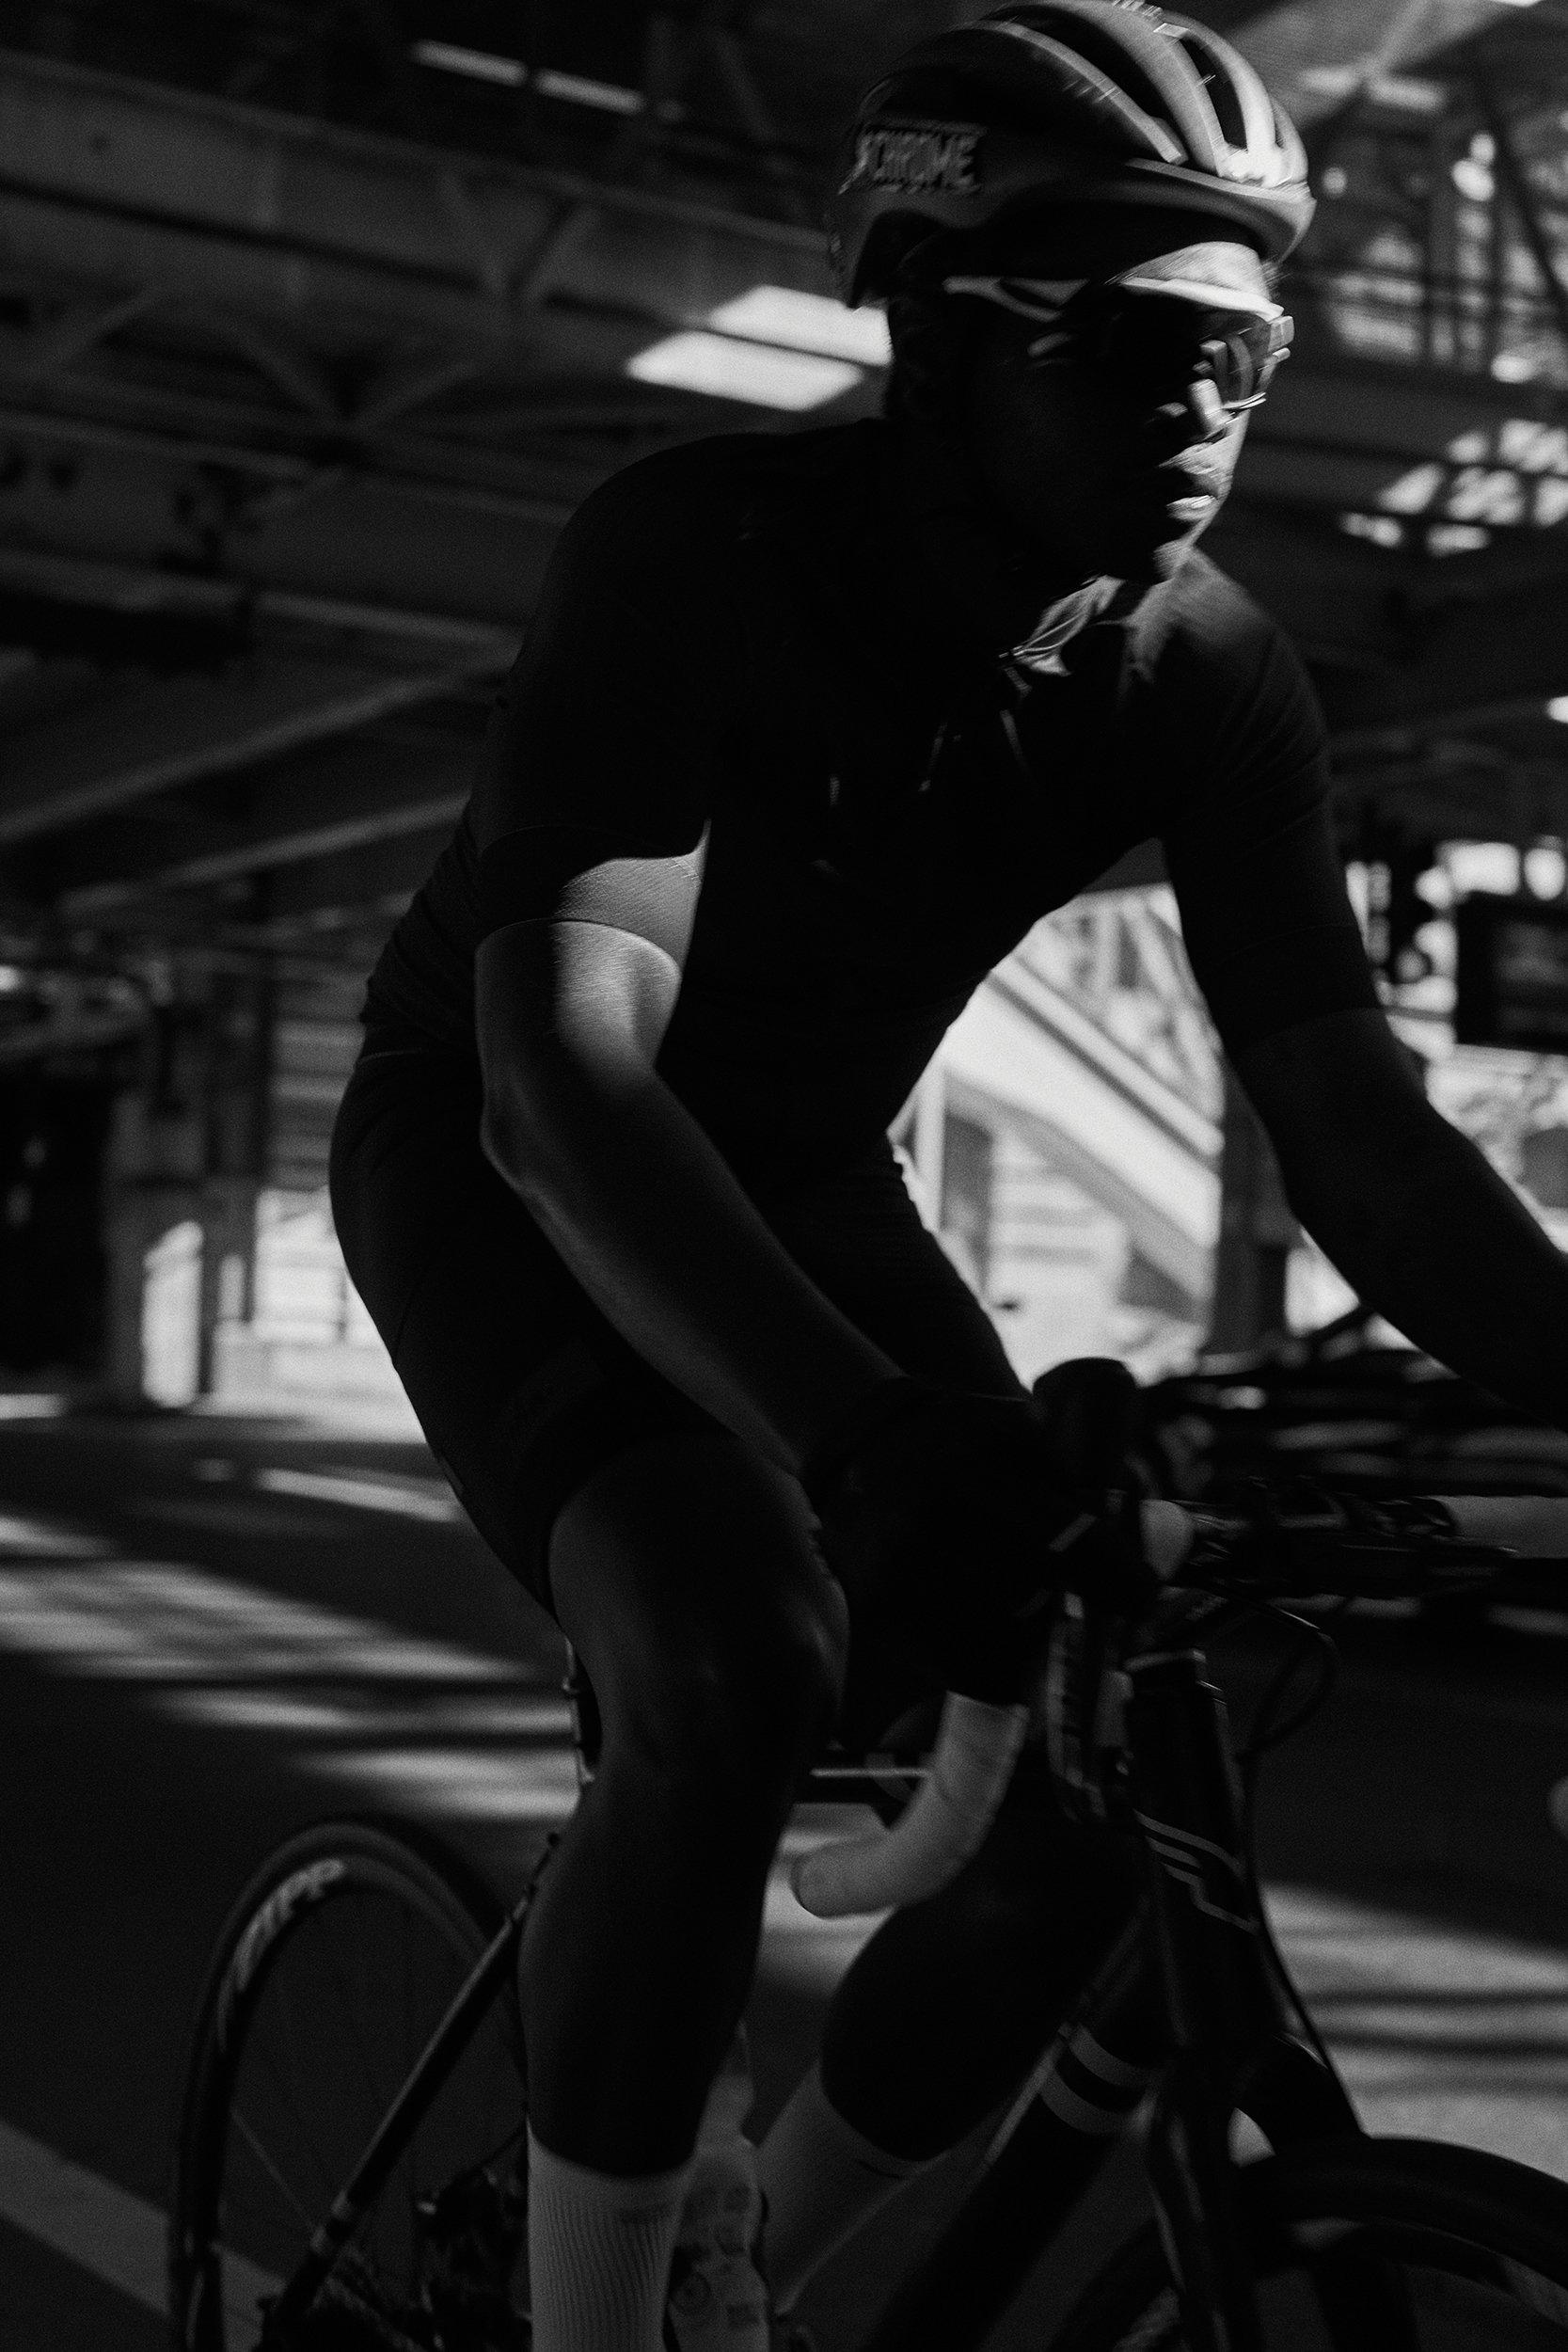 cyclist-bicycle-biking-action-sports-athletics-athlete-chicago-photography-2